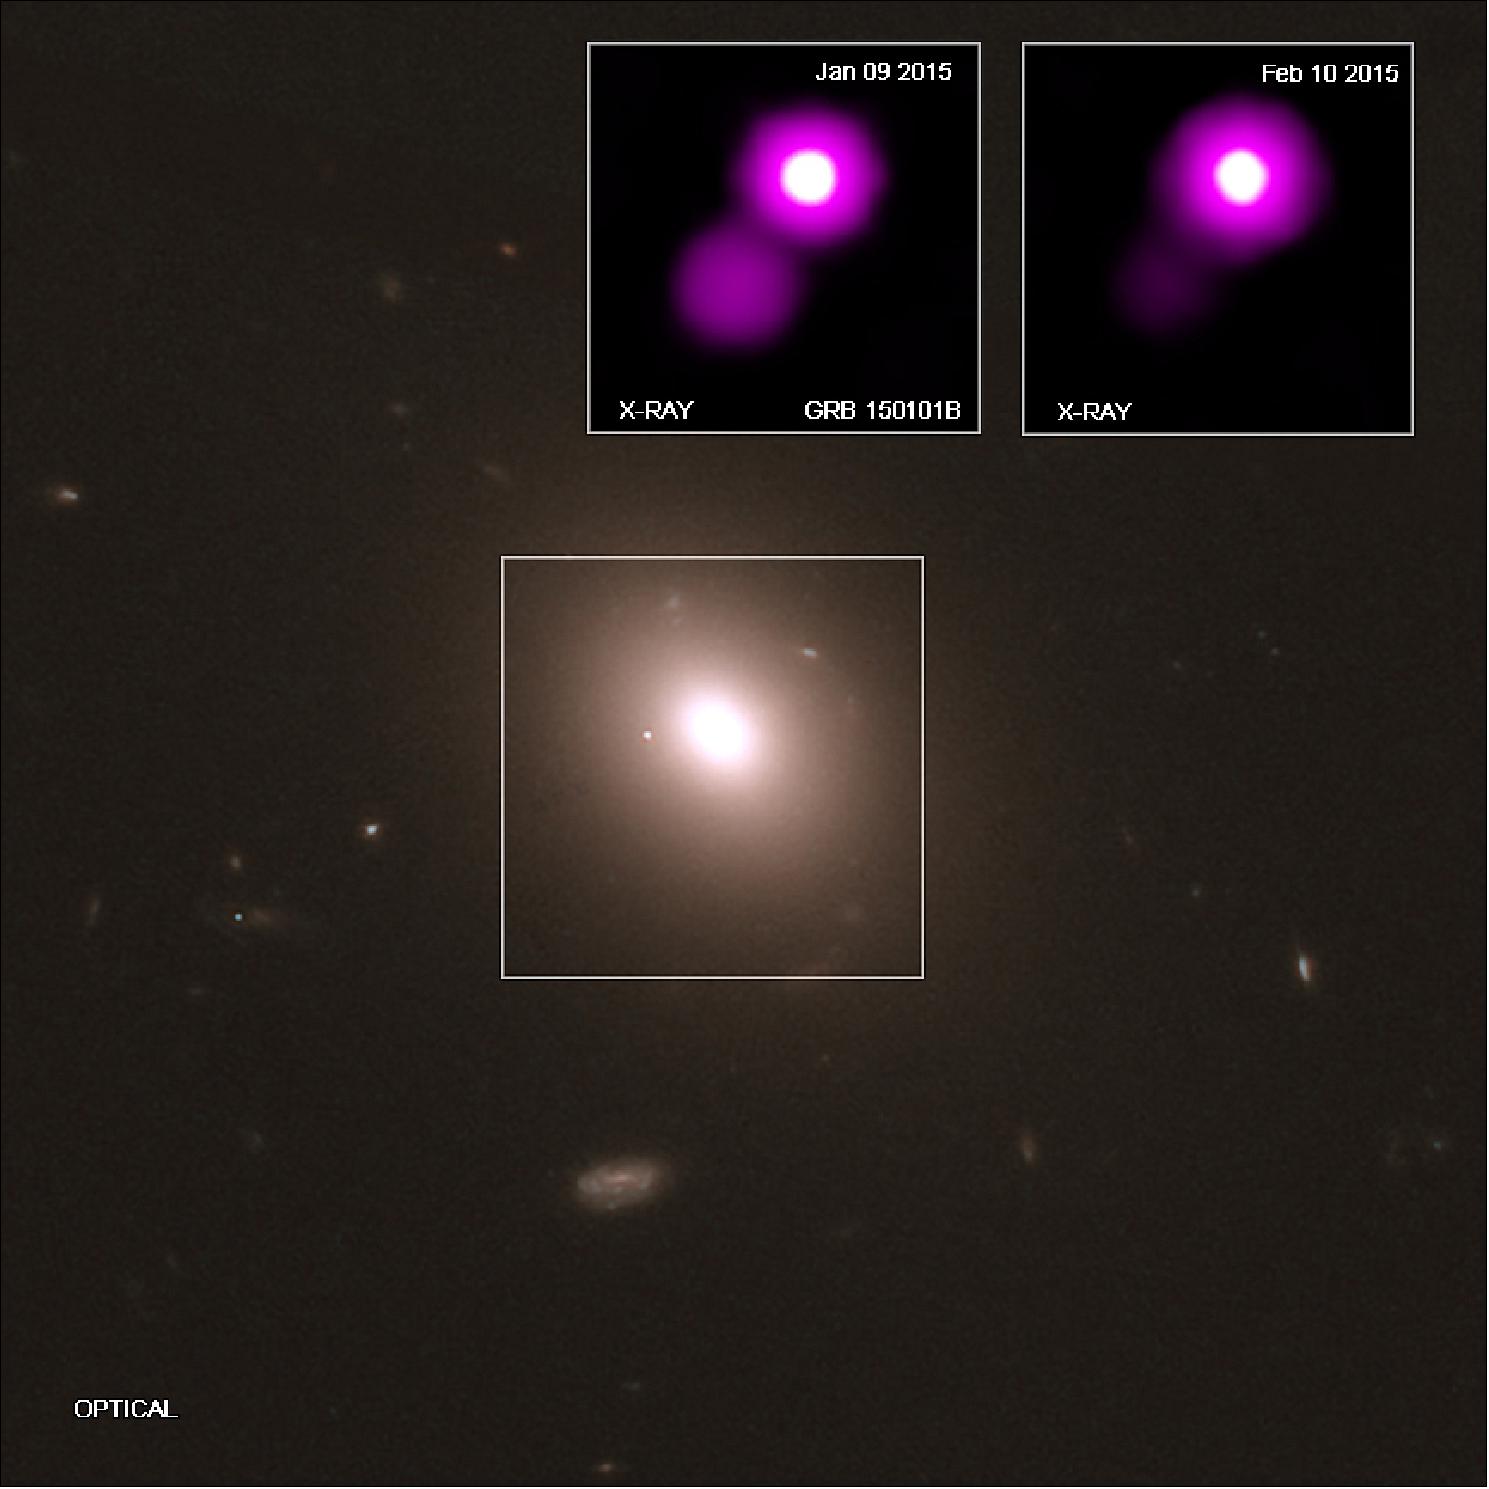 Figure 47: A distant cosmic relative to the first source that astronomers detected in both gravitational waves and light may have been discovered, as reported in our latest press release. This object, called GRB 150101B, was first detected by identified as a gamma ray burst (GRB) by NASA's Fermi Gamma-ray Space Telescope in January 2015. This image shows data from NASA’s Chandra X-ray Observatory (purple in the inset boxes) in context with an optical image of GRB 150101B from the Hubble Space Telescope (image credit: X-ray: NASA/CXC/GSFC/UMC/E. Troja et al.; Optical and infrared: NASA/STScI)